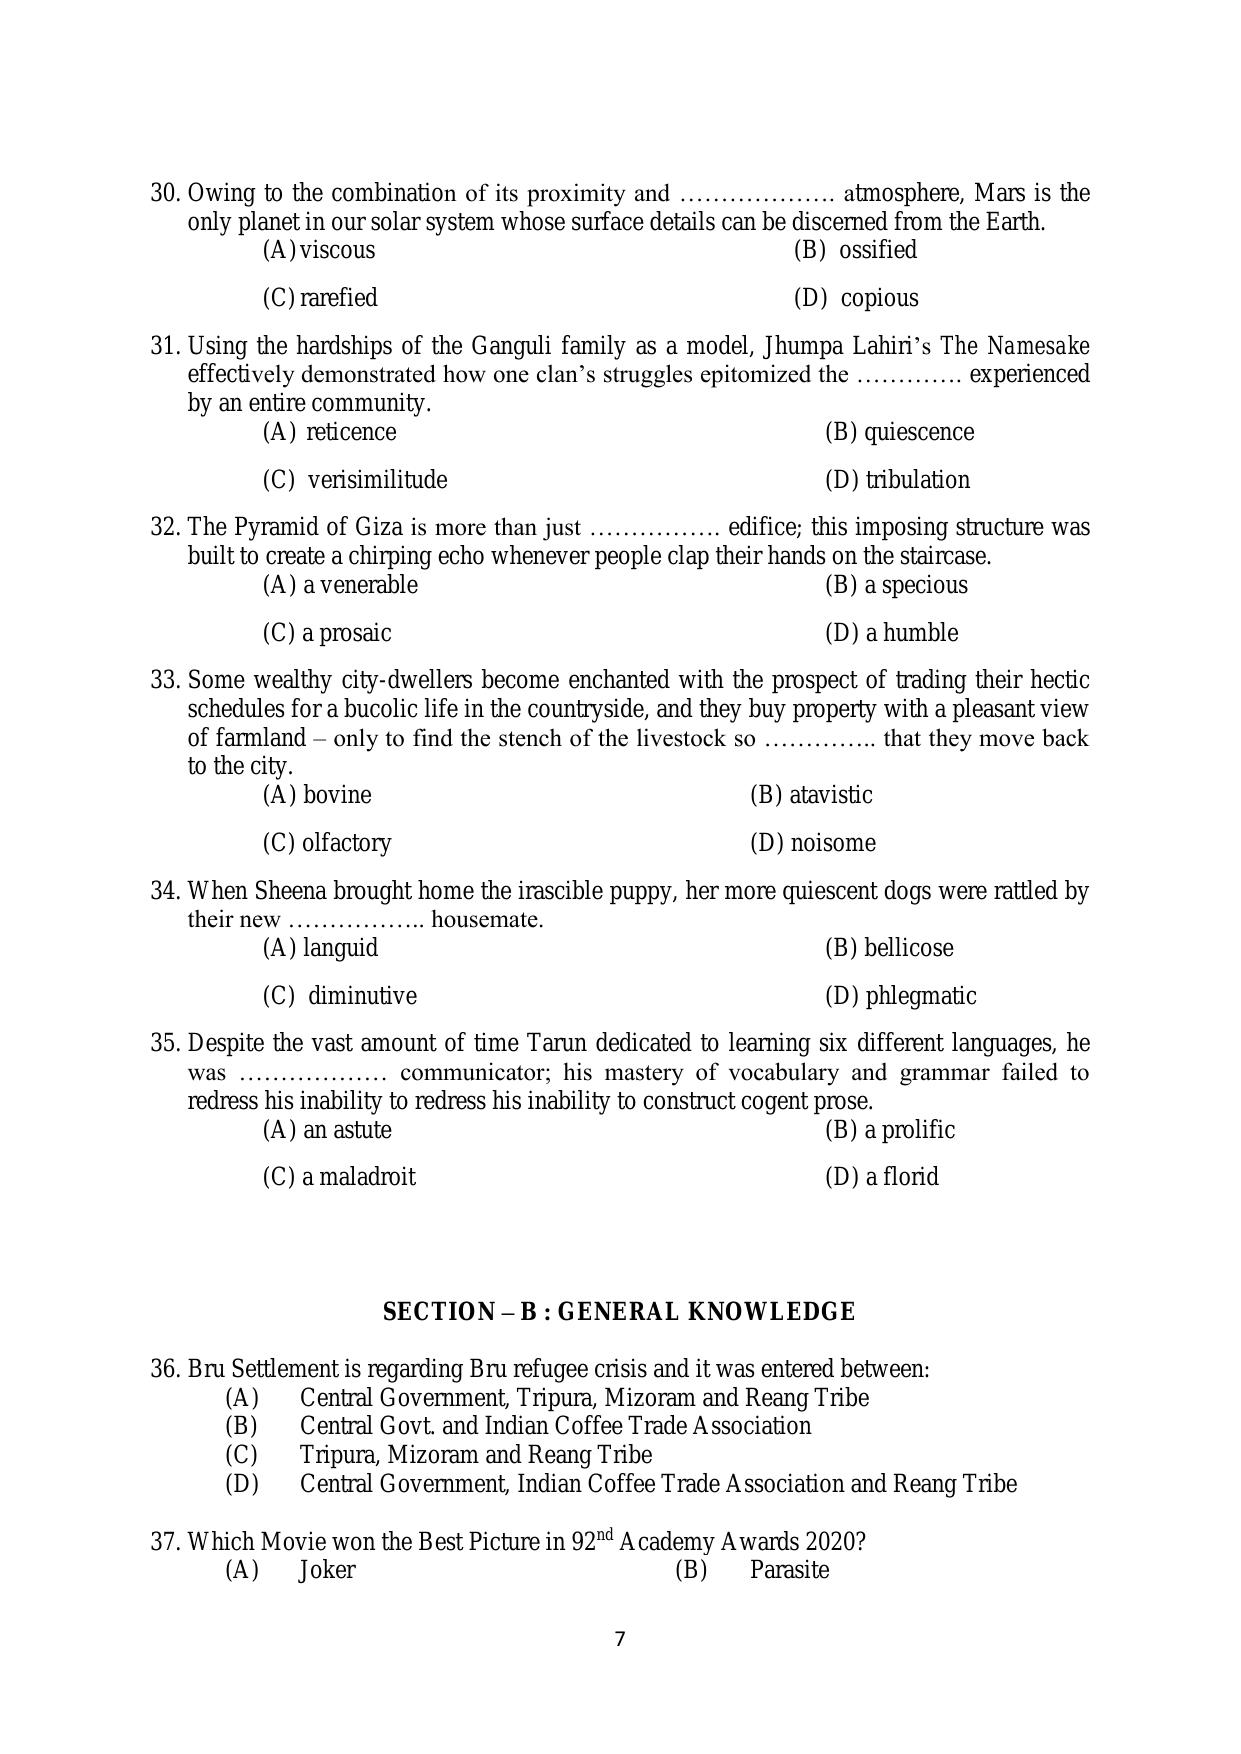 AILET 2020 Question Paper for BA LLB - Page 7